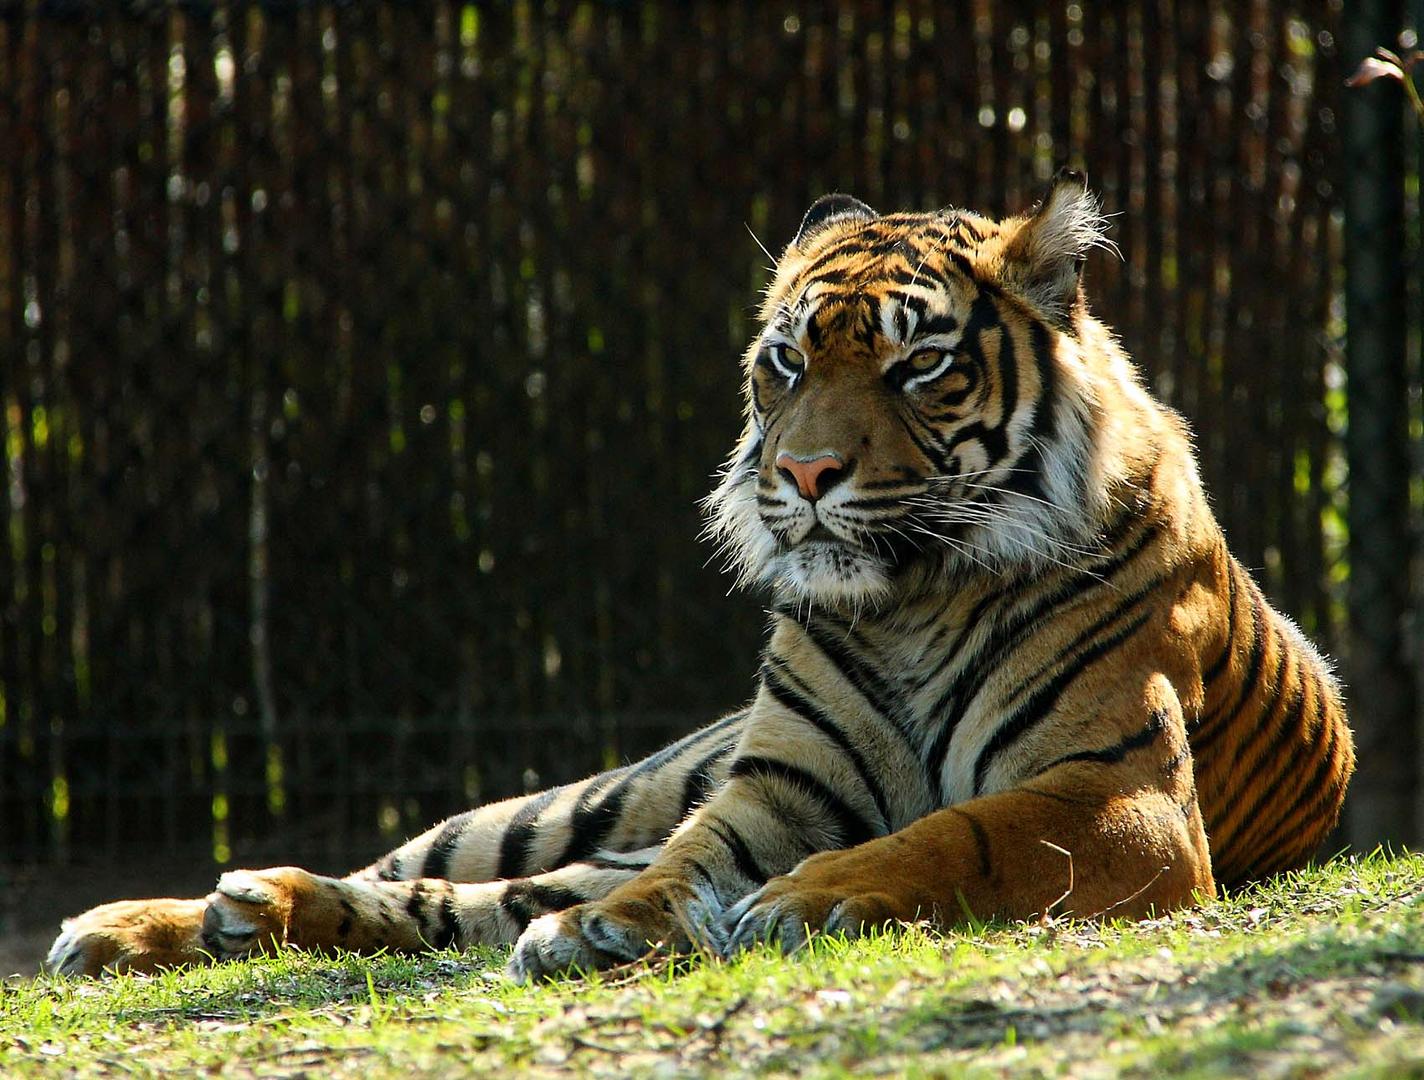 The splendid tiger, on of the most threatened animals